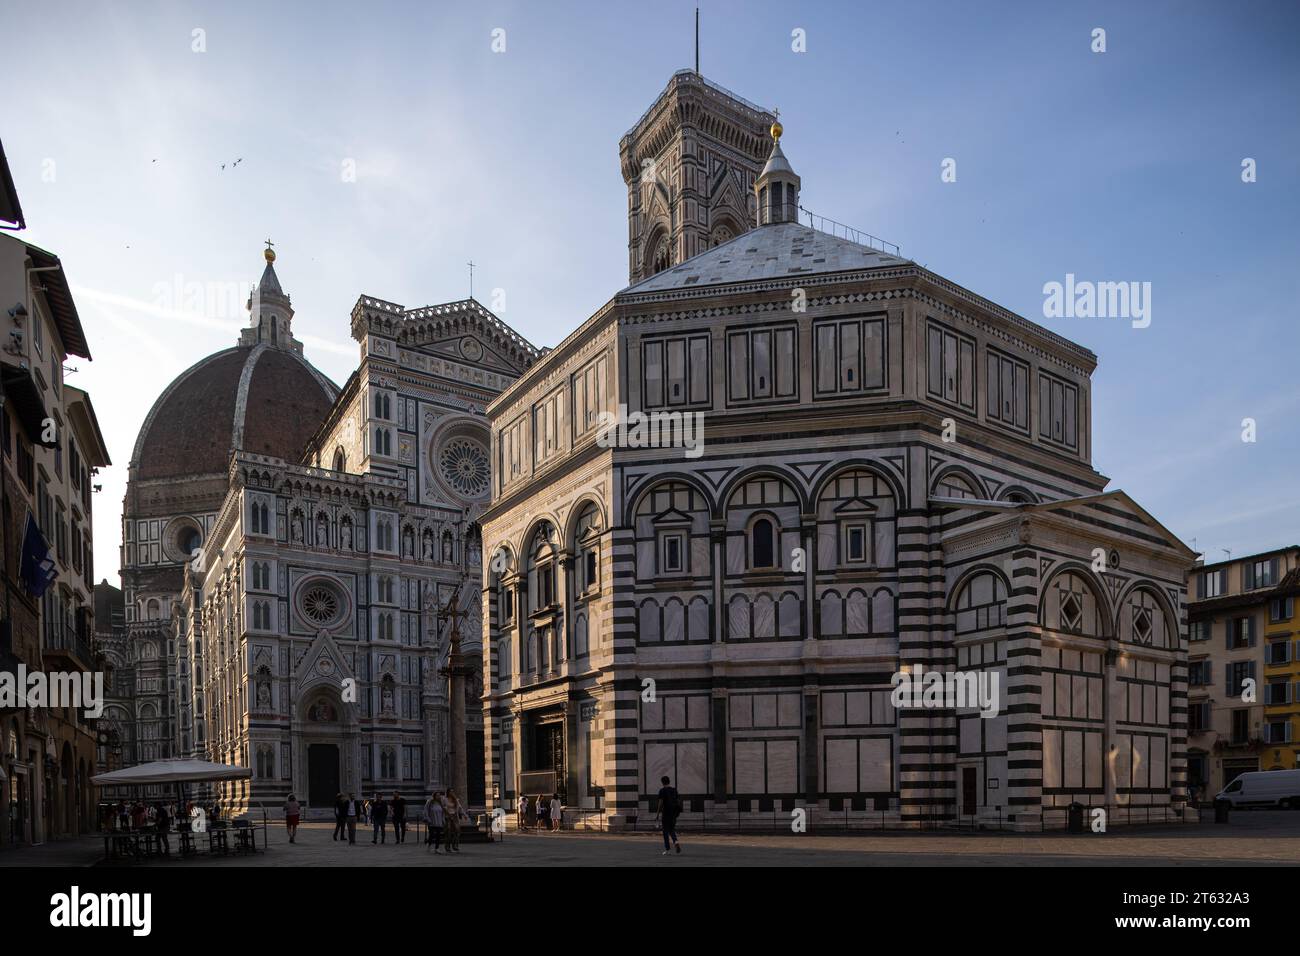 The beautiful Babtisterium and Duomo of Florence, Italy Stock Photo